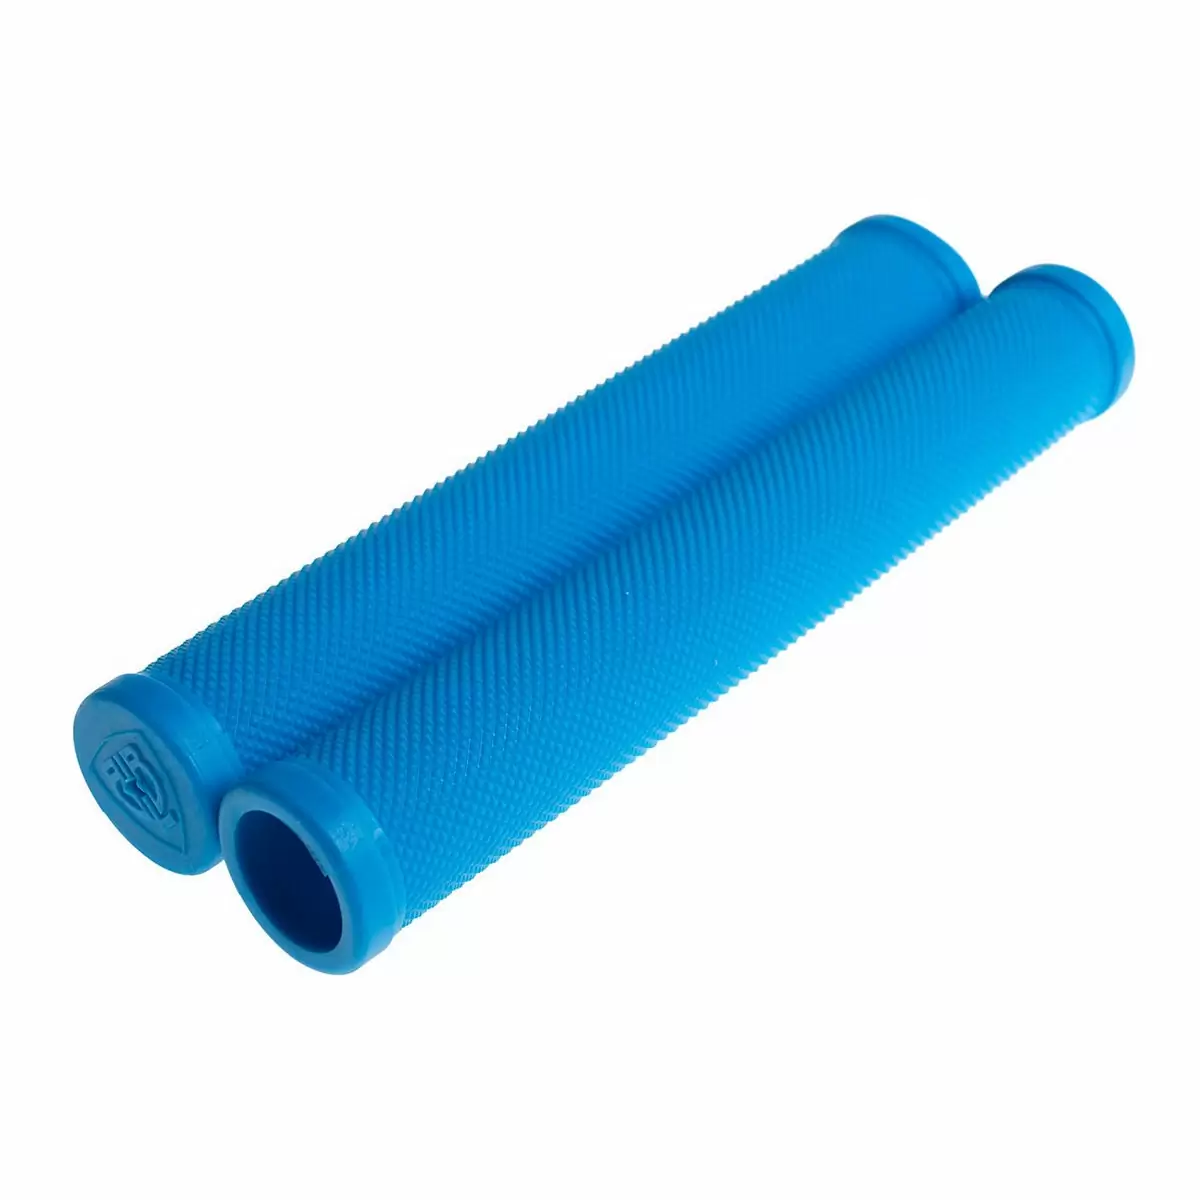 Pair chewy grips blue - image